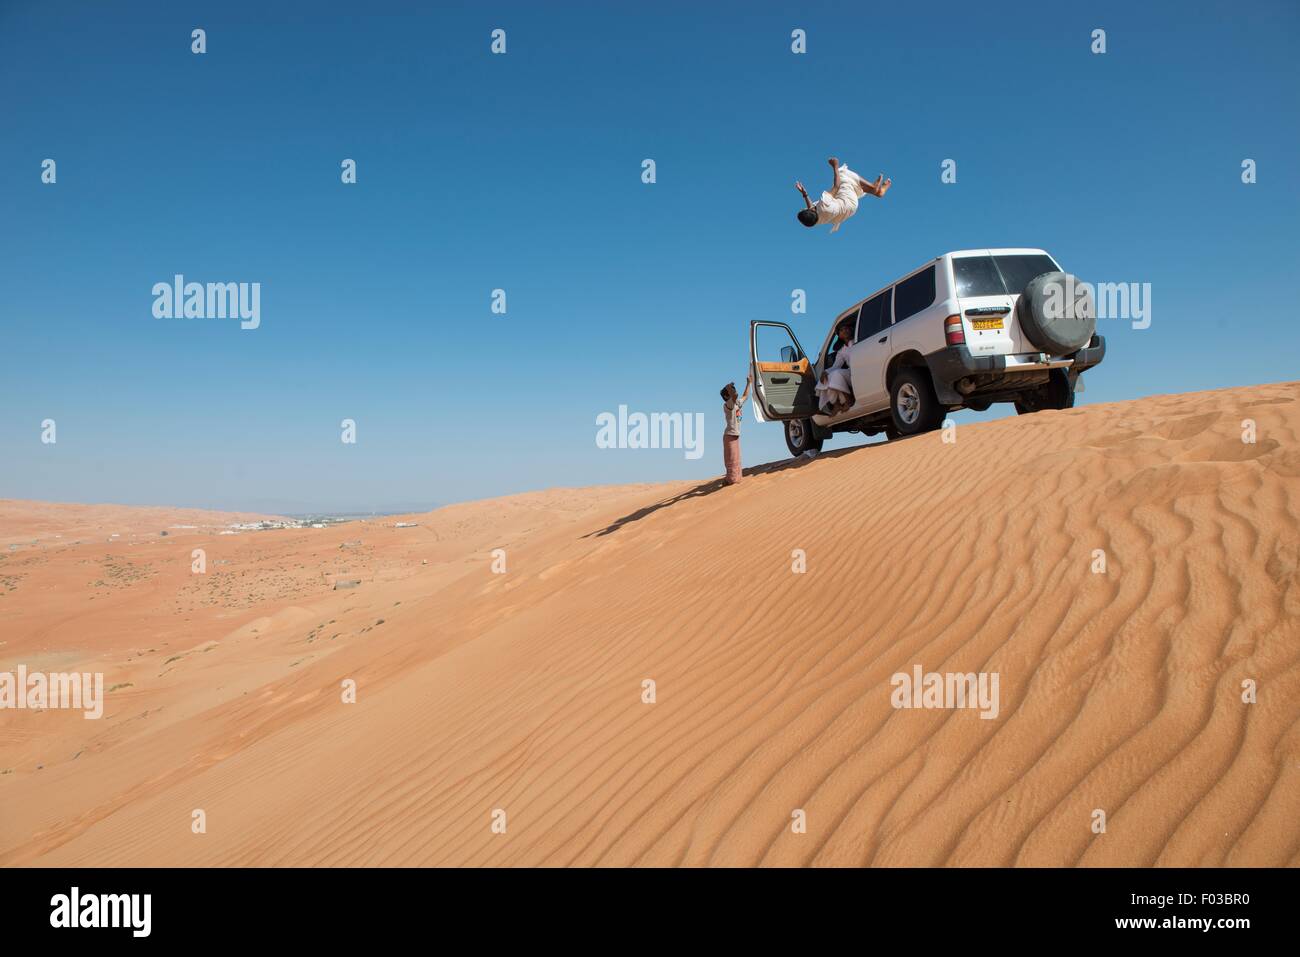 Omani youth jumping from a vehicle in desert sand dunes. Stock Photo